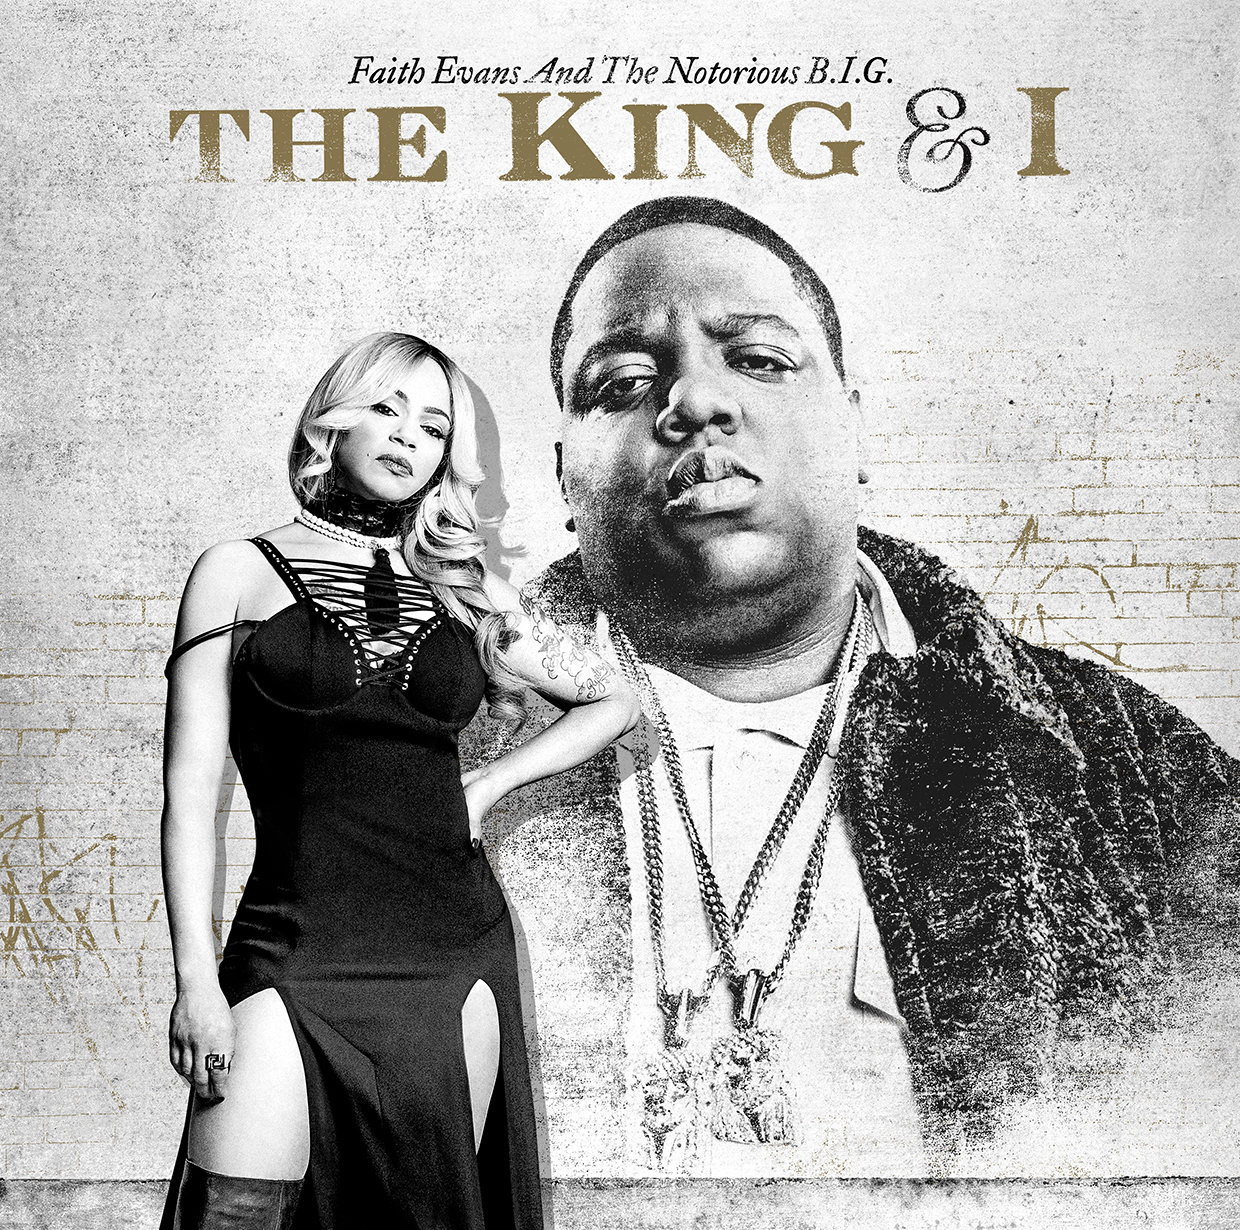 New Video: Faith Evans & Notorious B.I.G. – “Take Me There” Feat. Sheek Louch & Styles P [WATCH]